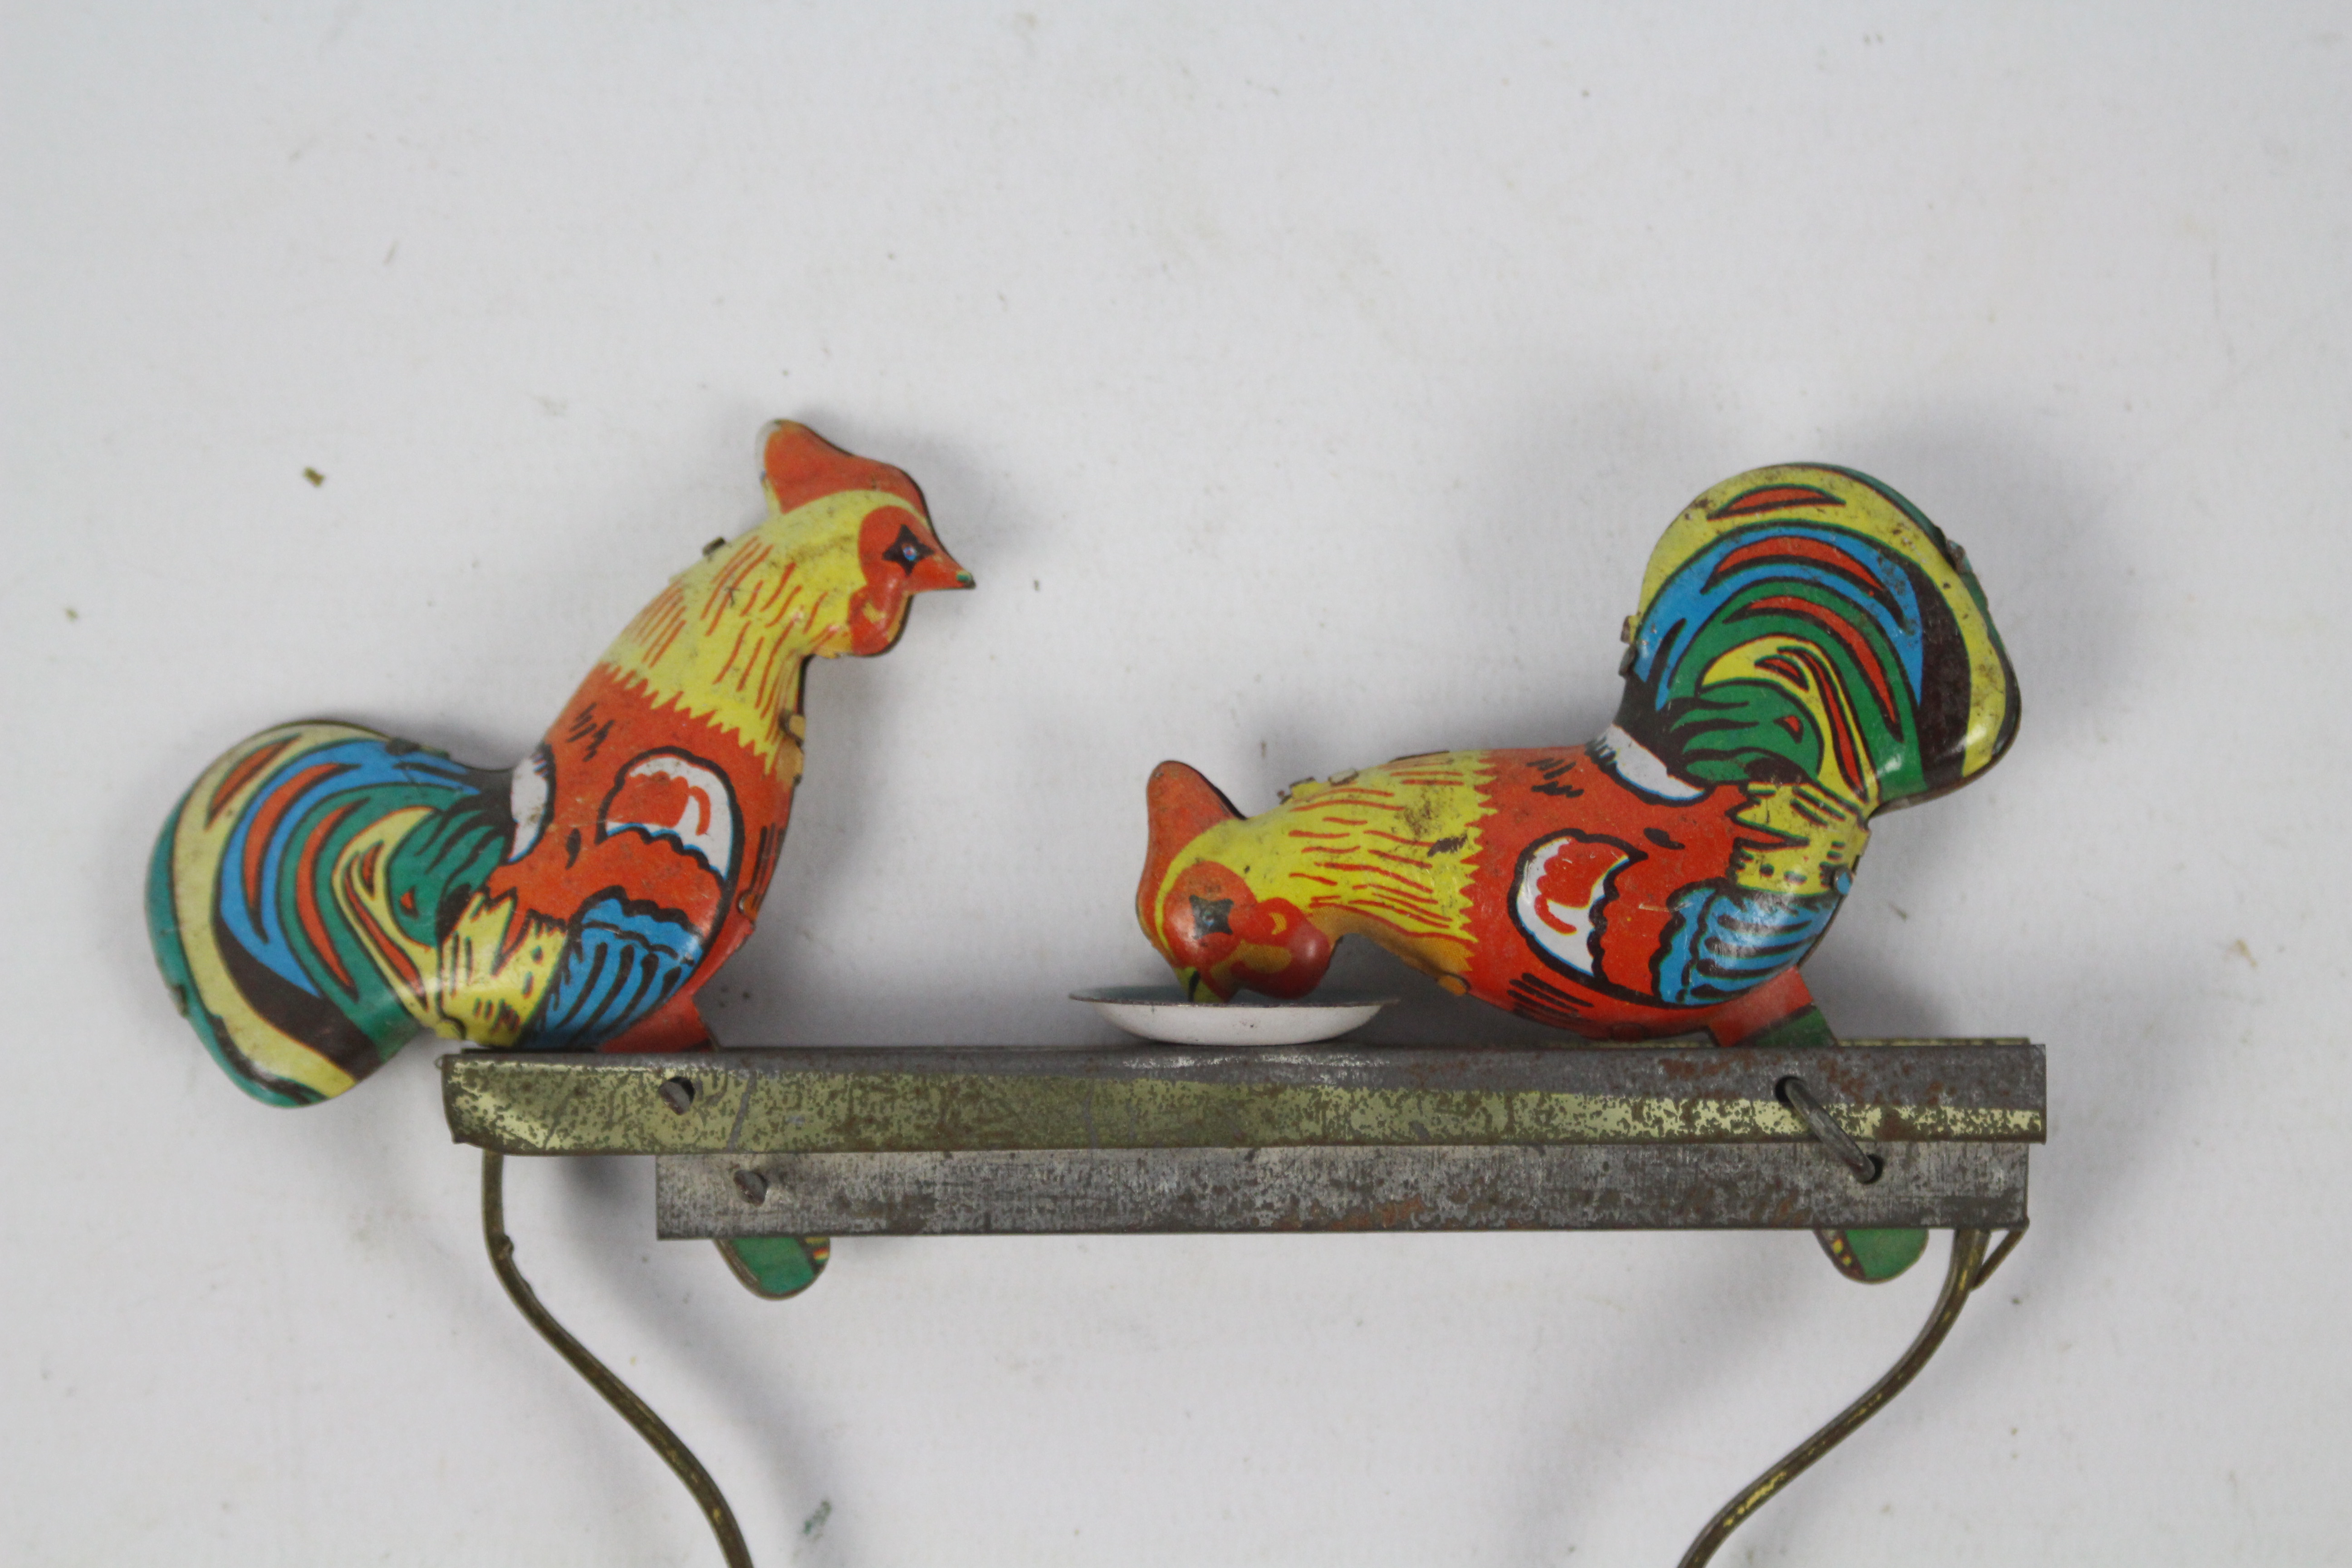 Vintage tin plate mechanical pecking rooster toy - A vintage tin plate toy. - Image 2 of 3